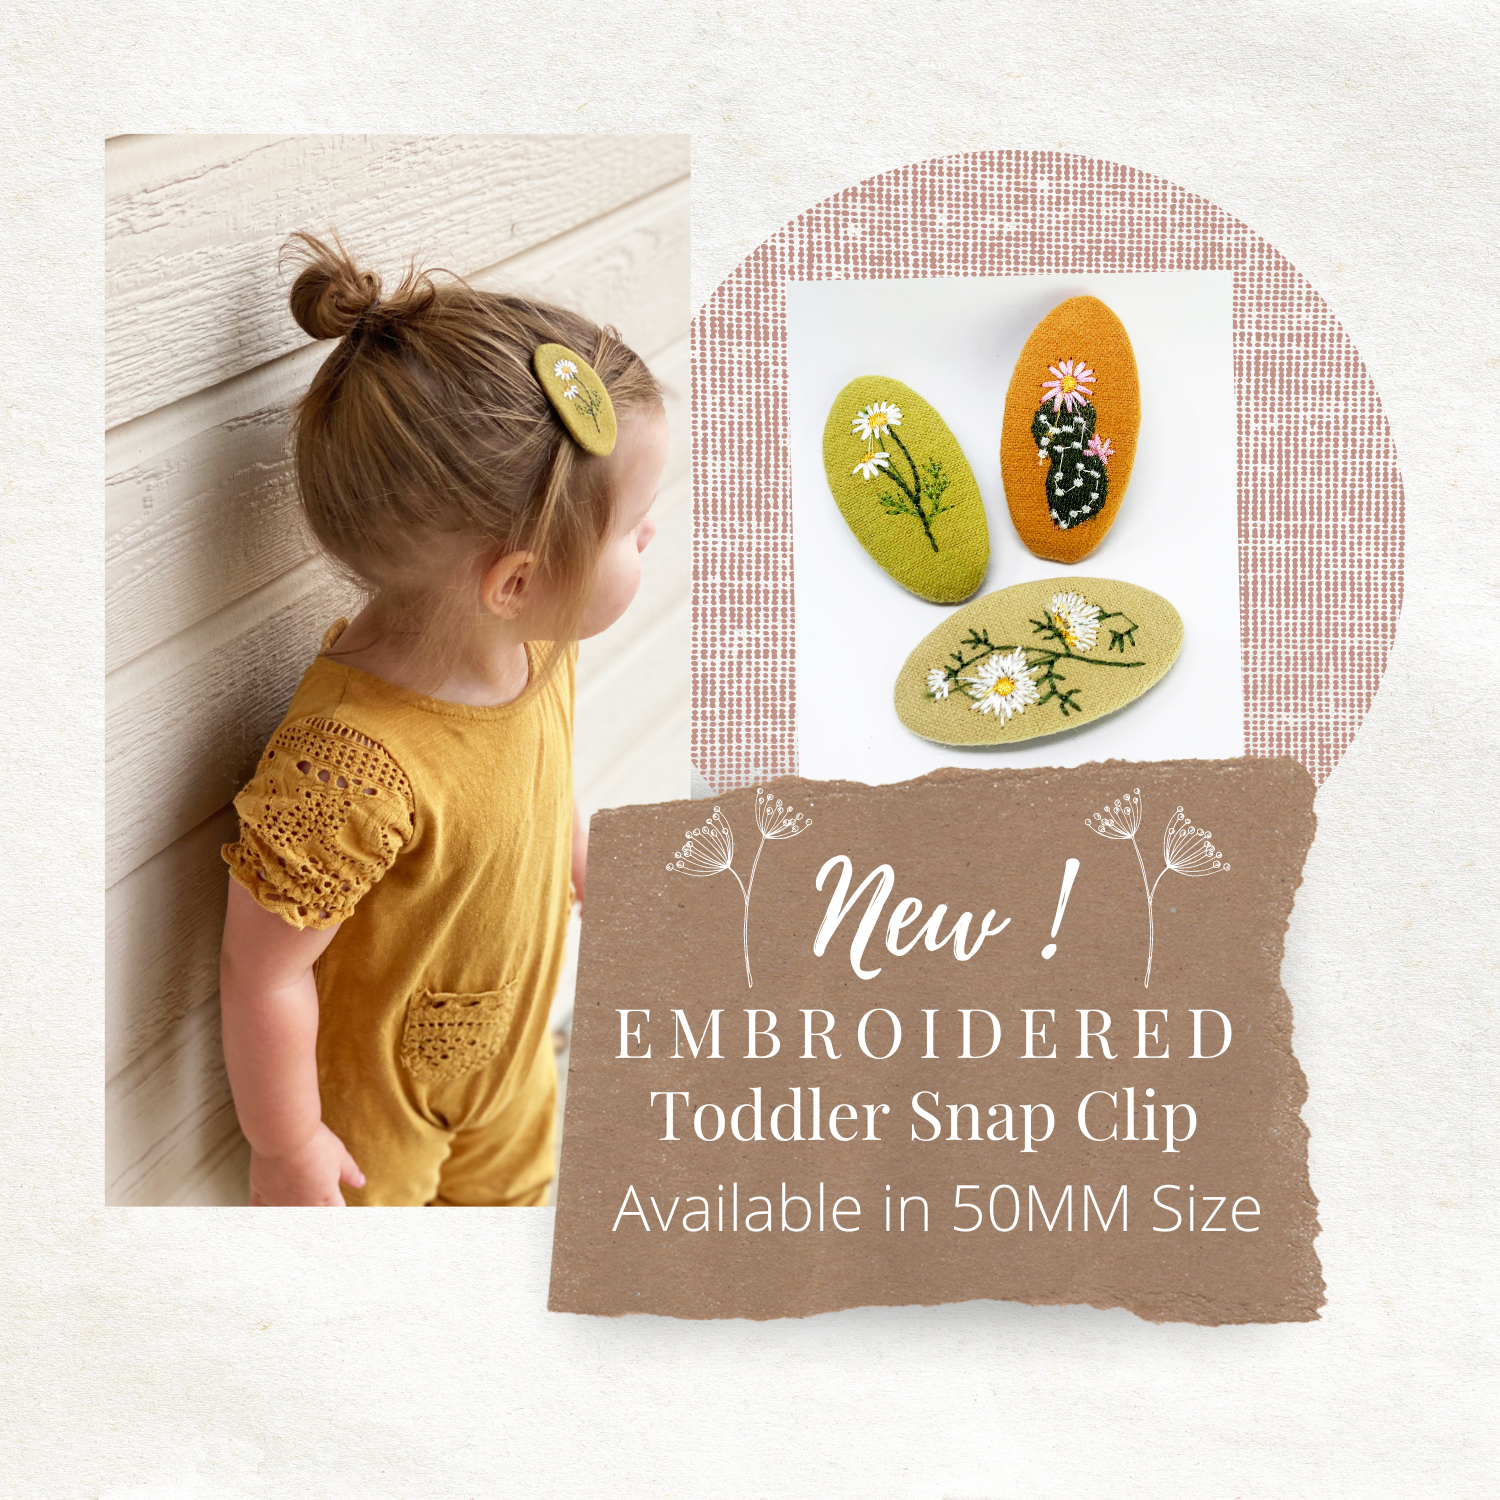 NEW FLORAL EMBROIDERED FABRIC SNAP CLIP FOR TODDLERS!